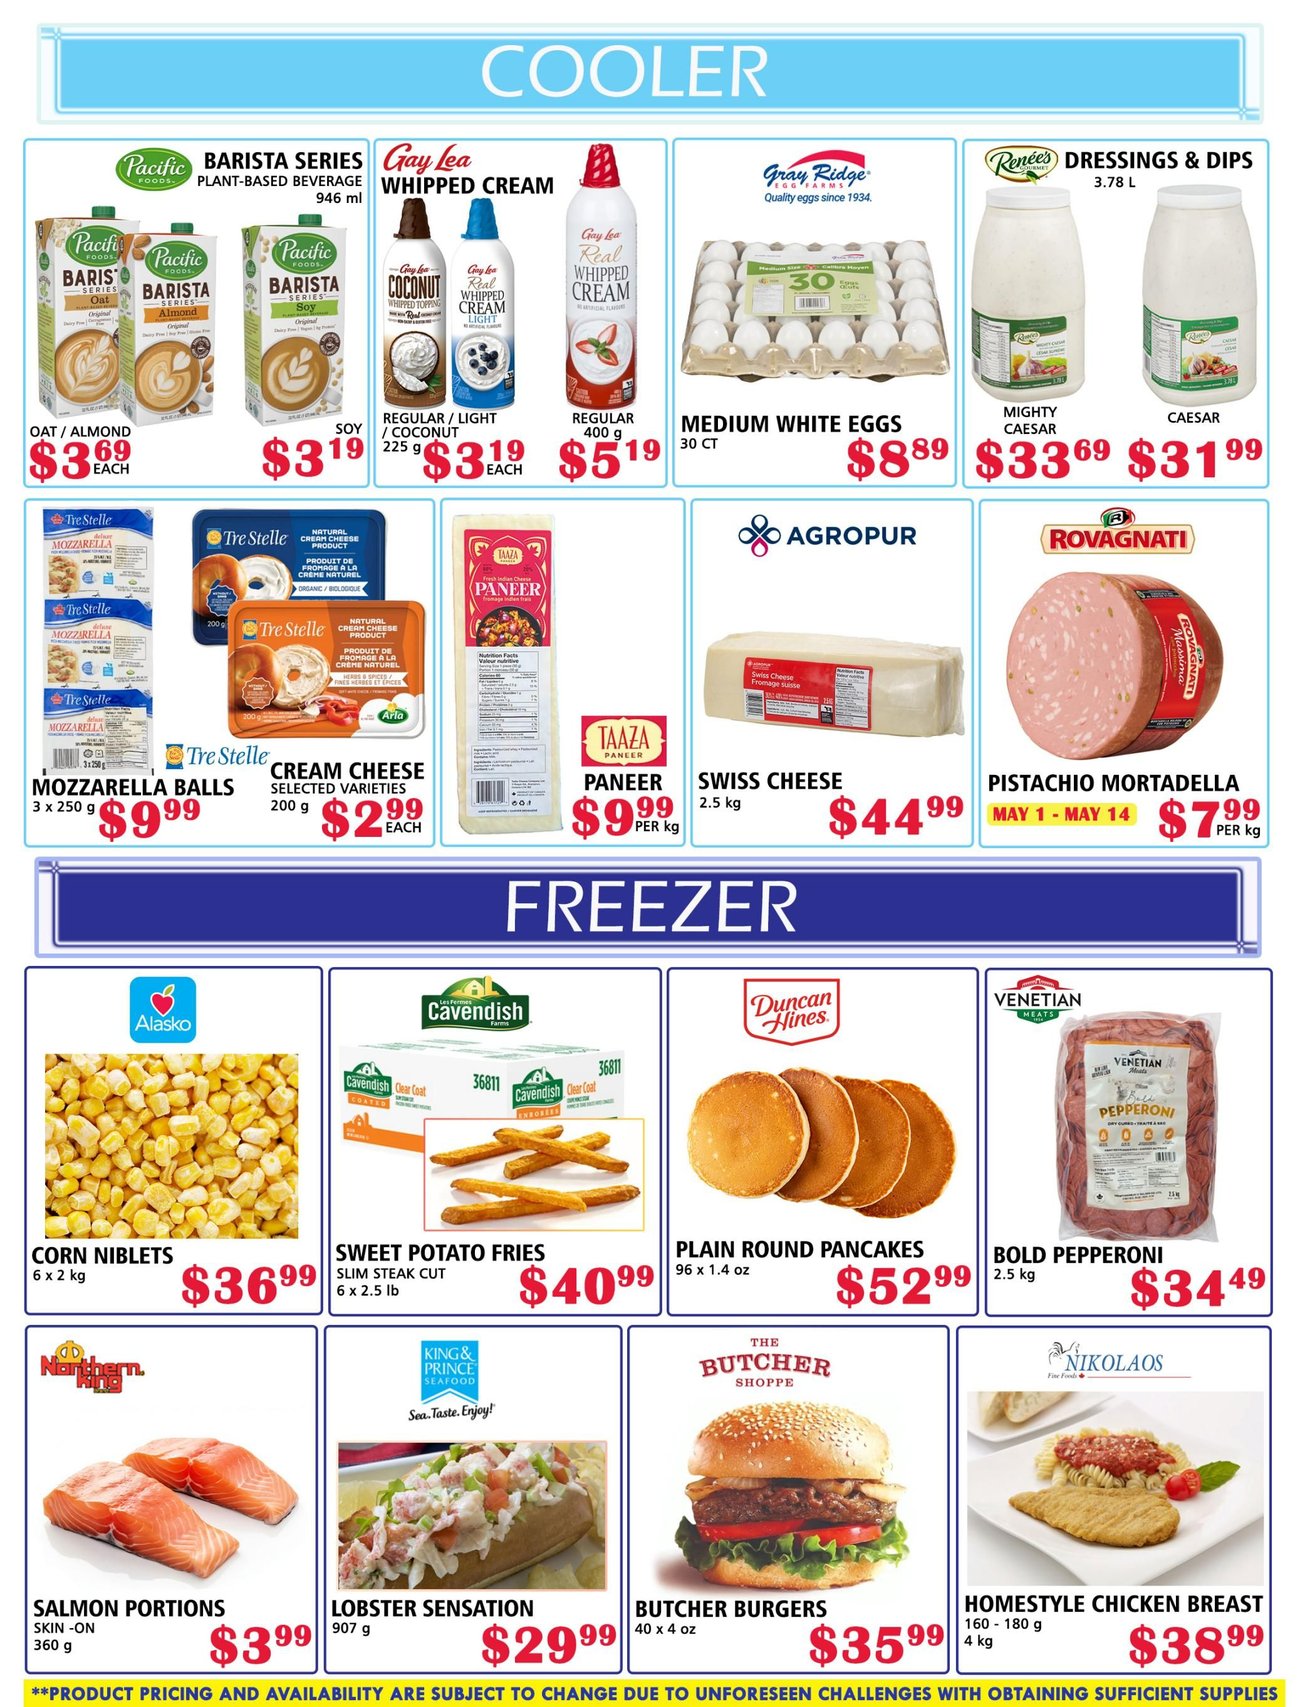 MVR Cash and Carry - Monthly Specials - Page 3